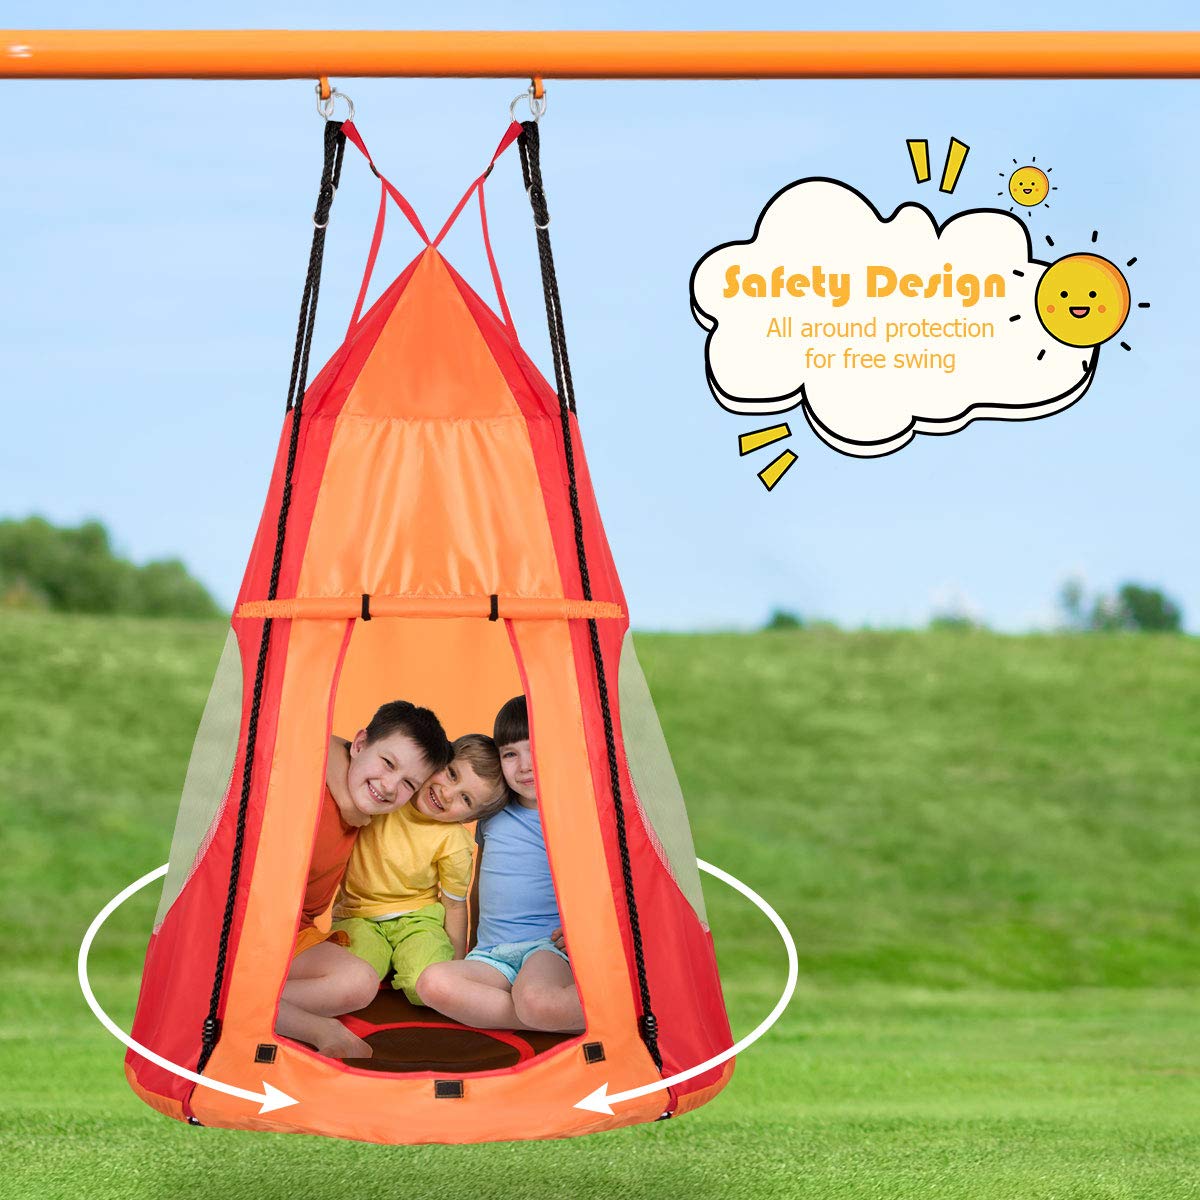 100cm 2 in 1 Kids Detachable Hanging Tree Swing Tent and Nest Swing Chair, Orange